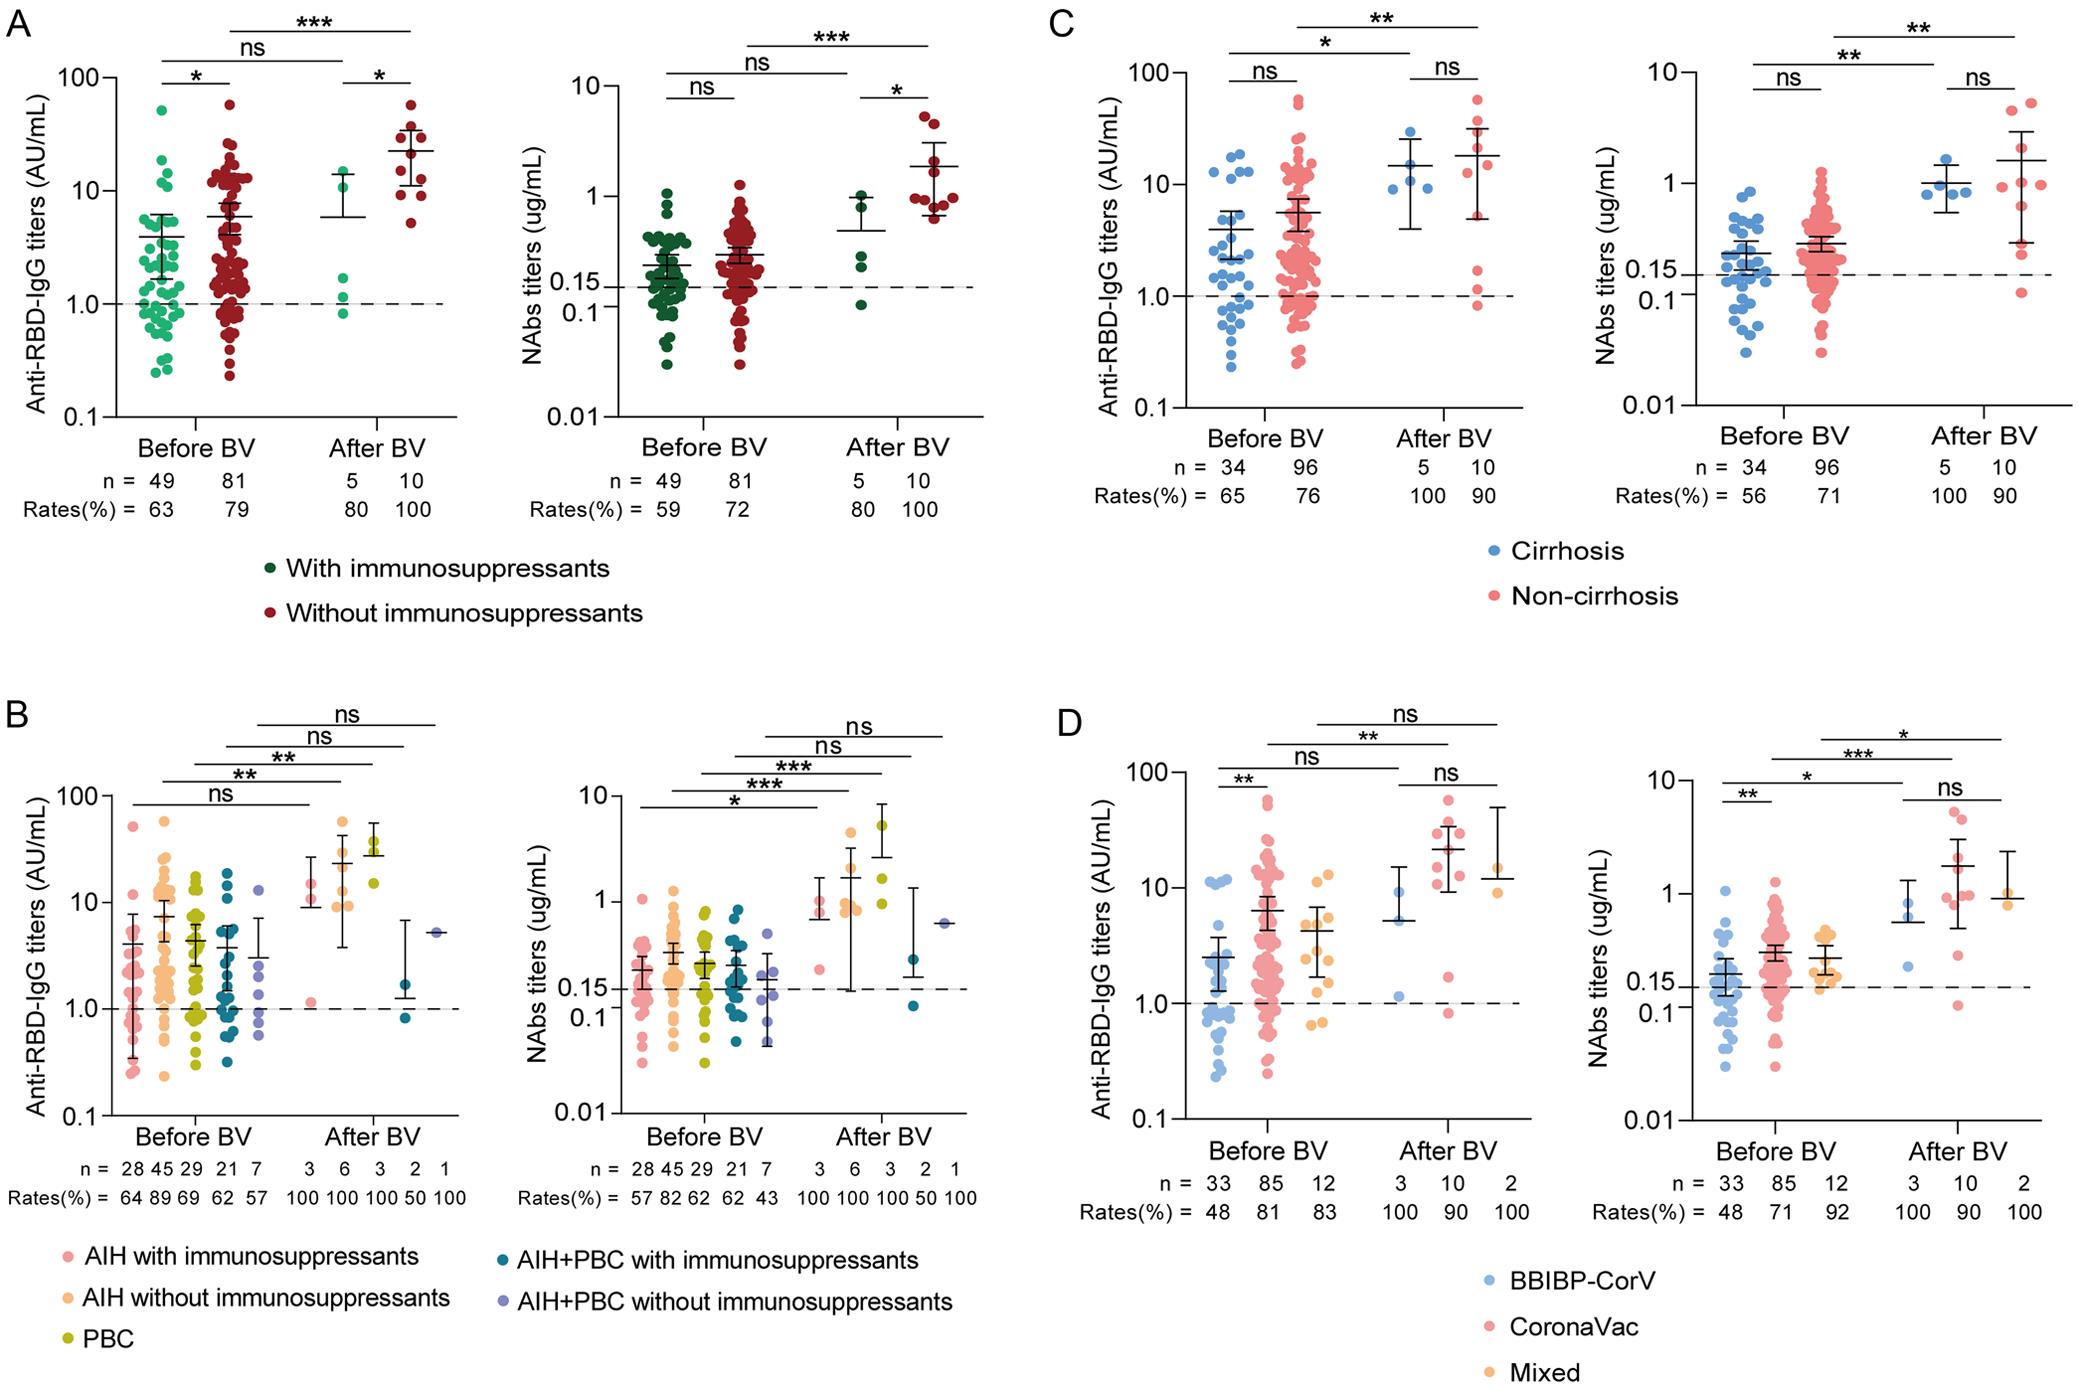 Subgroup analysis of antibody responses in AILD patients after booster vaccination.